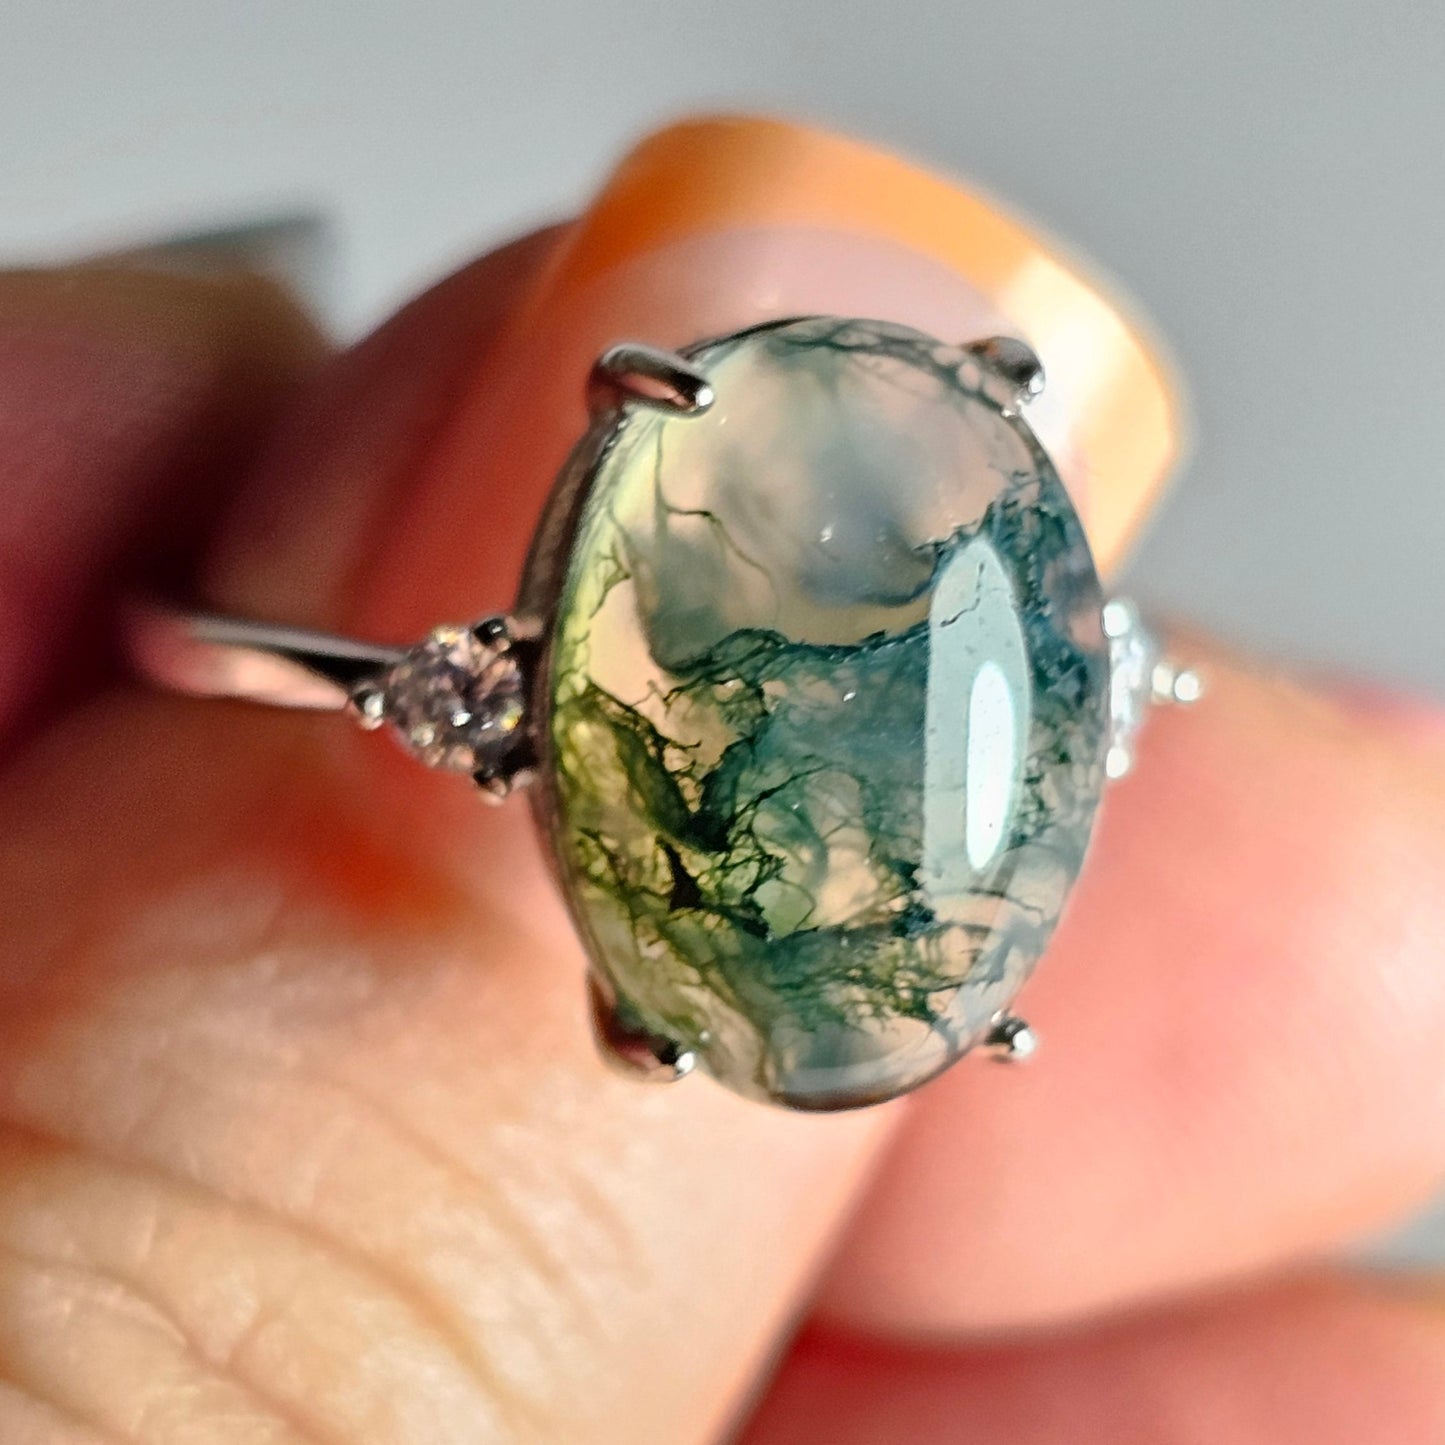 This adjustable ring is crafted from sterling silver and features a beautiful oval shaped Moss Agate with zircon side stones.